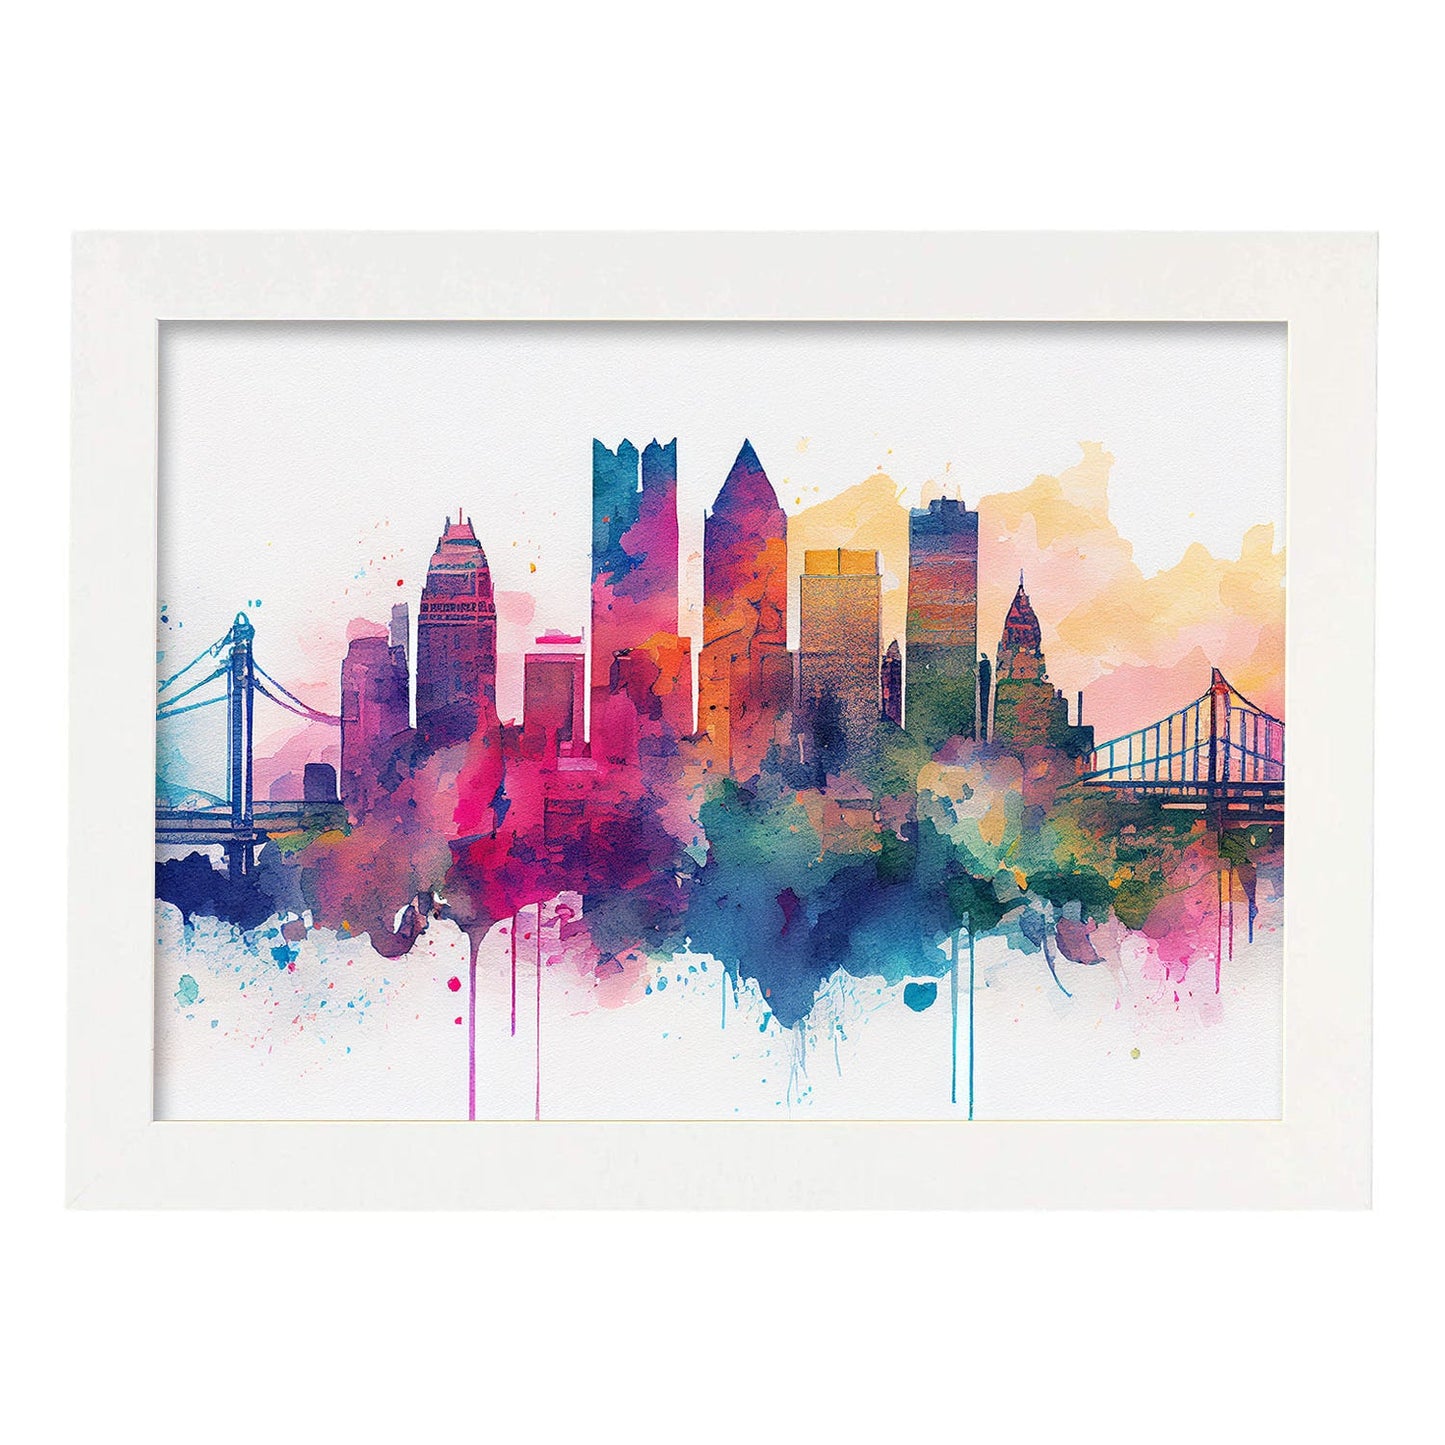 Nacnic watercolor of a skyline of the city of Pittsburgh. Aesthetic Wall Art Prints for Bedroom or Living Room Design.-Artwork-Nacnic-A4-Marco Blanco-Nacnic Estudio SL